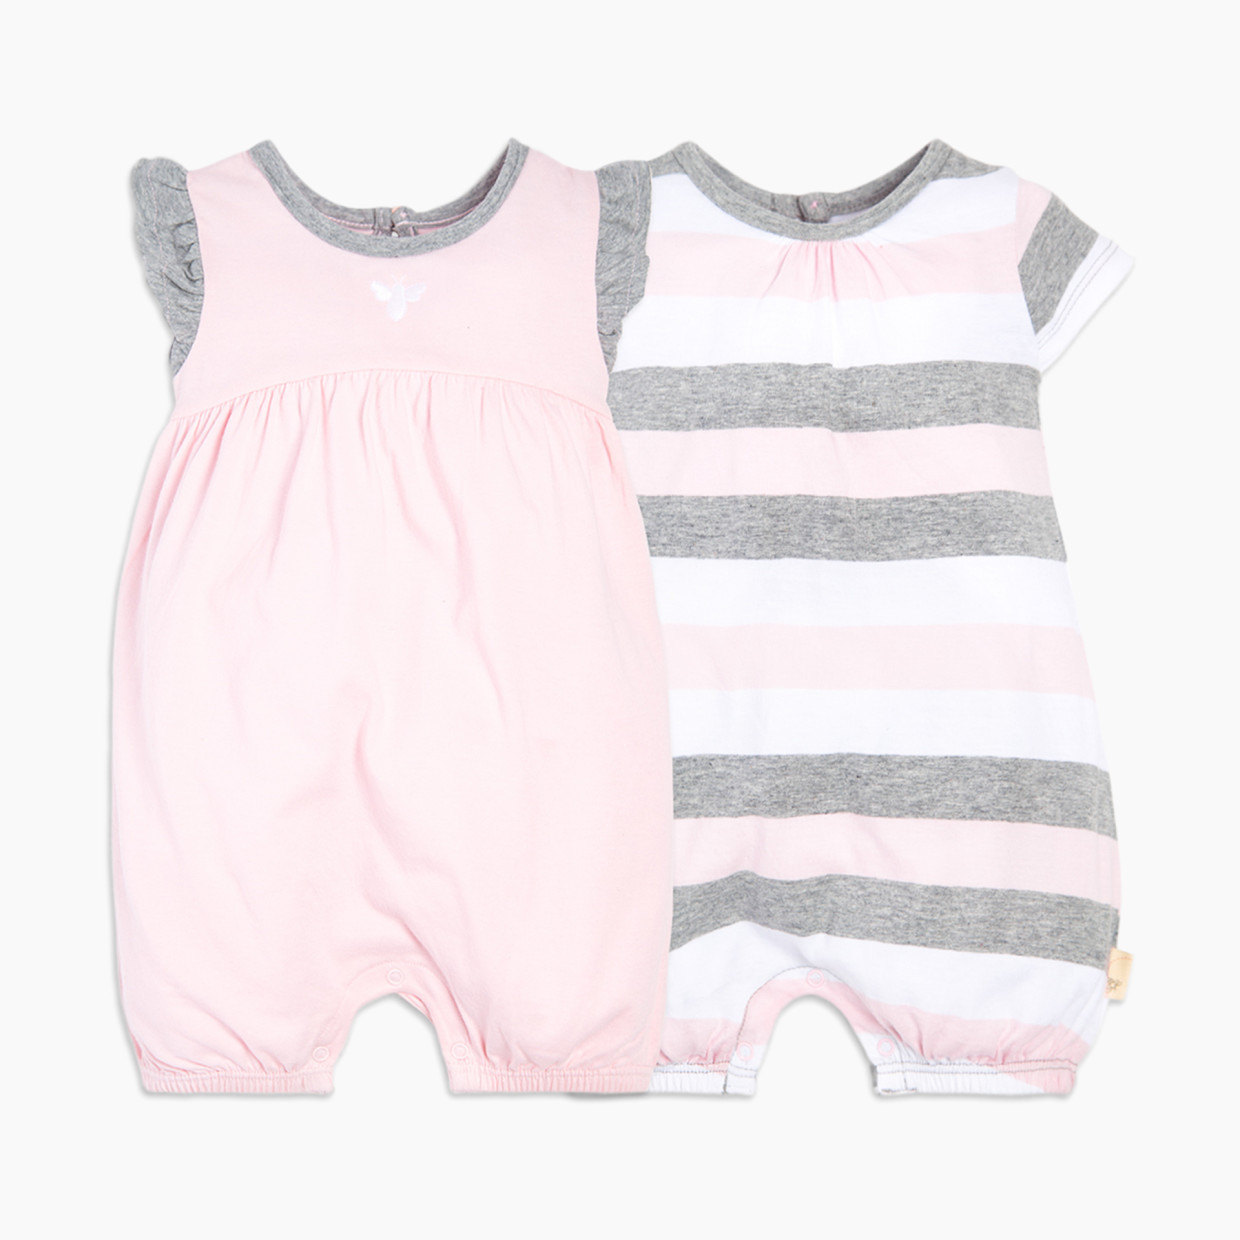 Burt's Bees Baby 2 Pack Rompers - Blossom Multi Stripe, 6-9 Months.